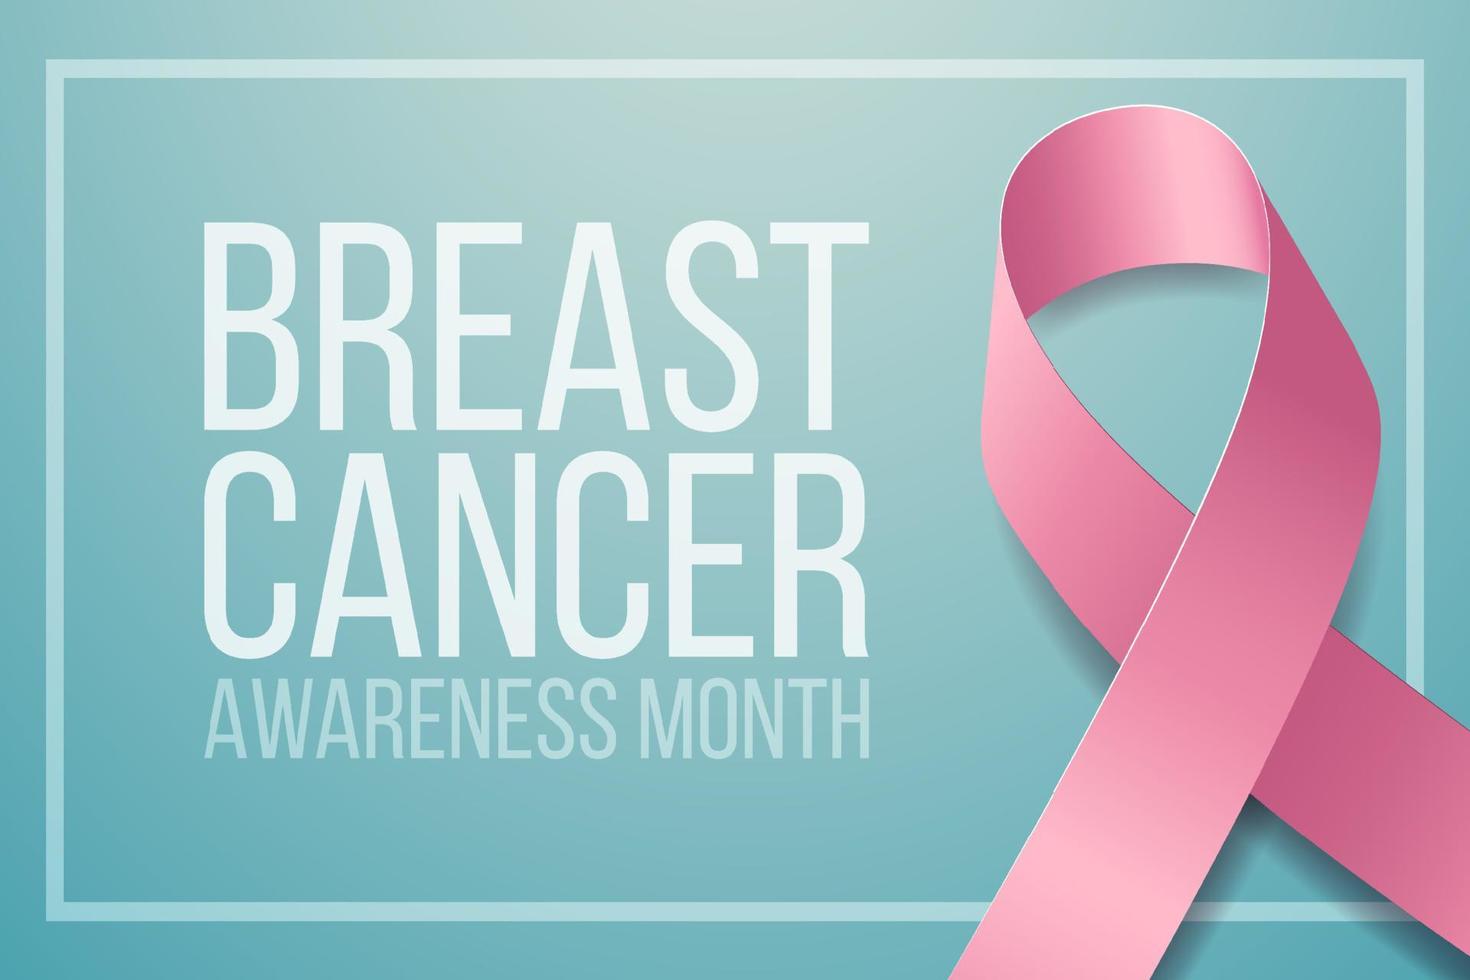 Breast Cancer awareness month. Banner  with pink ribbon awareness and text.  Vector illustration.